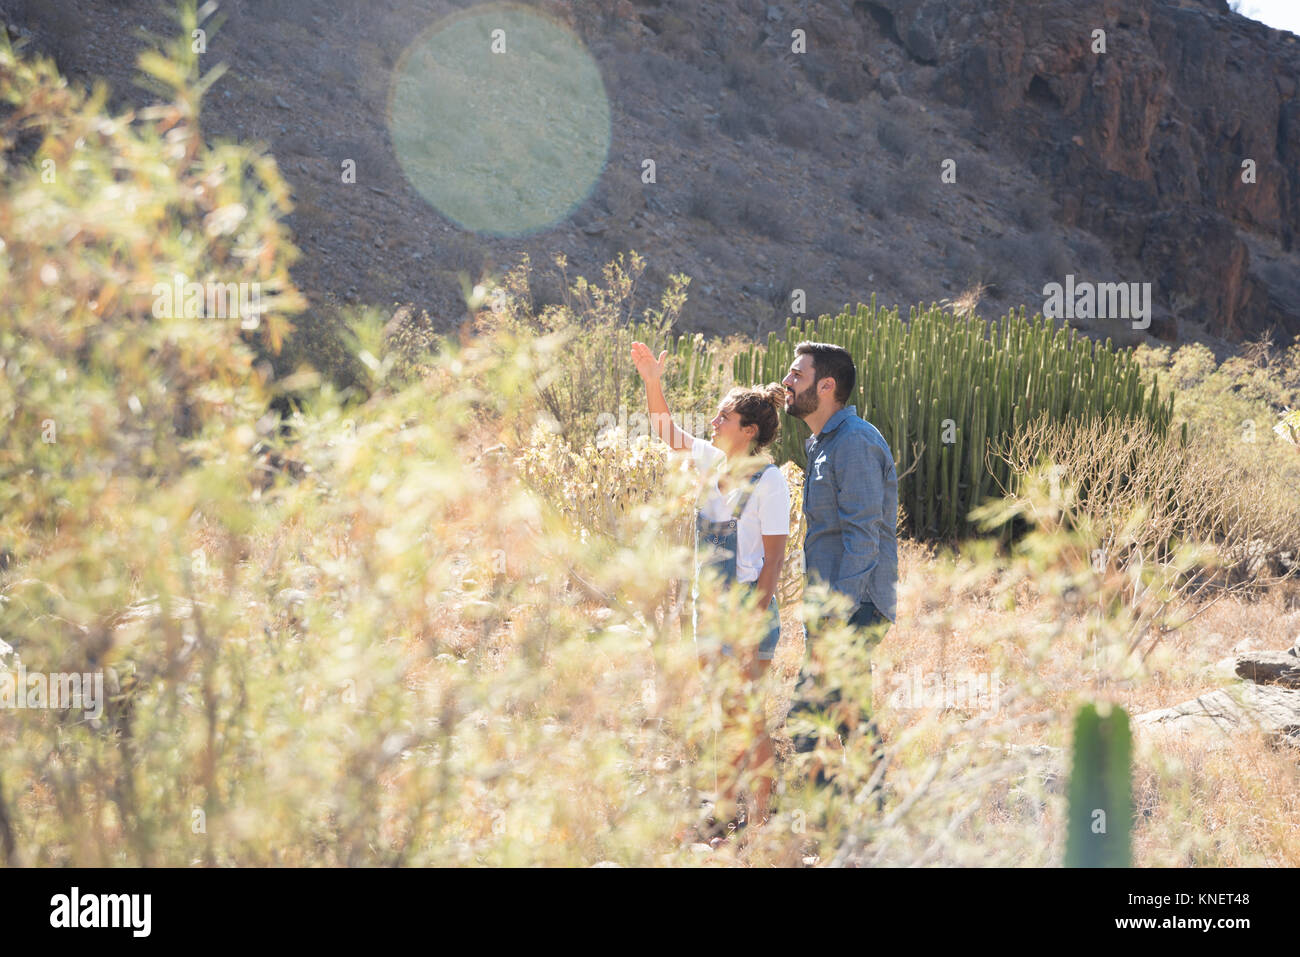 Young hiking couple looking up and pointing from sunlit valley, Las Palmas, Canary Islands, Spain Stock Photo